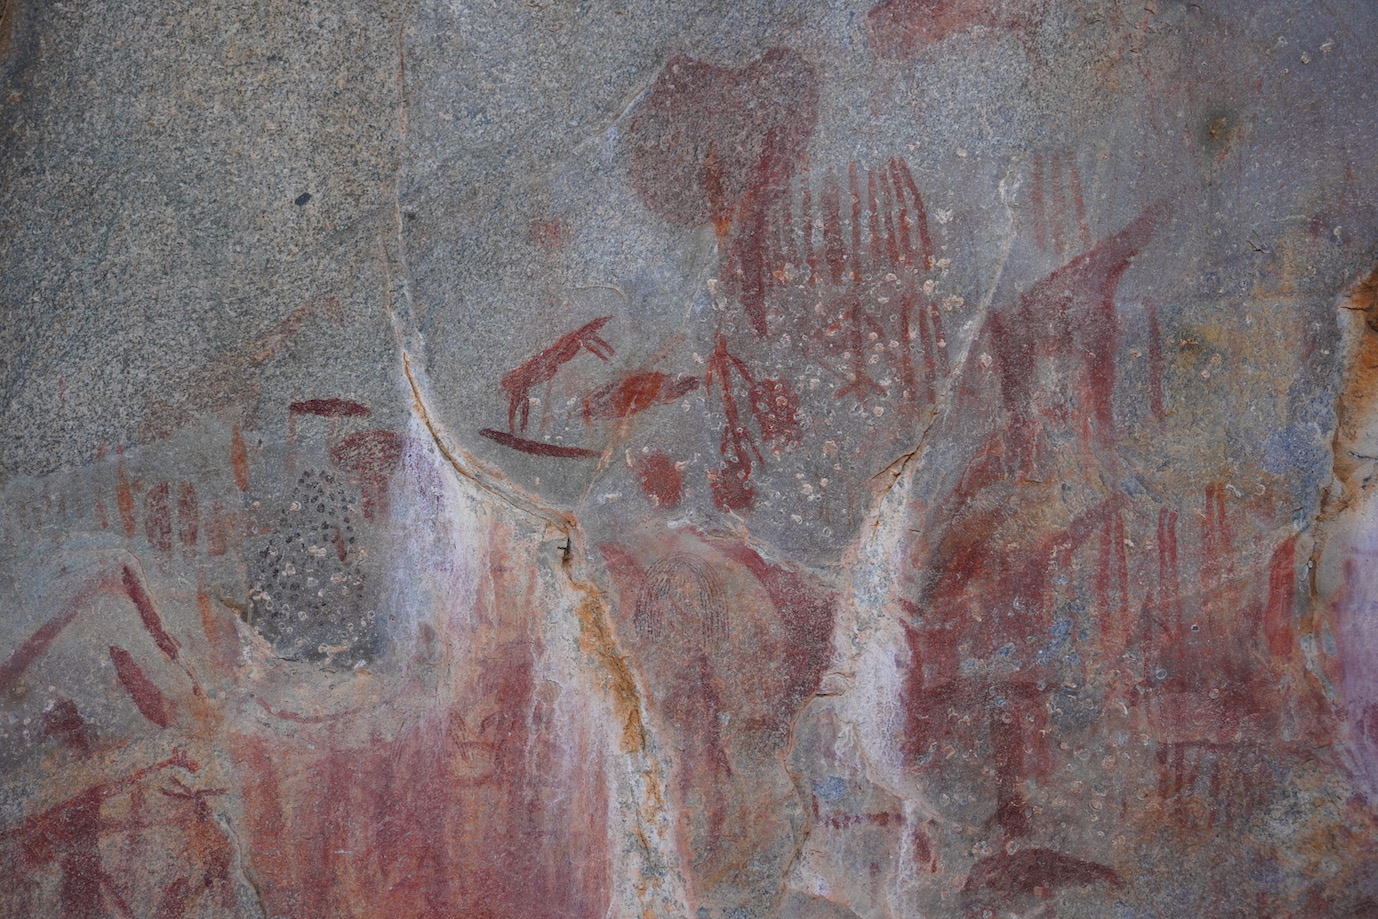 Some animals at the Igeleke rock art site